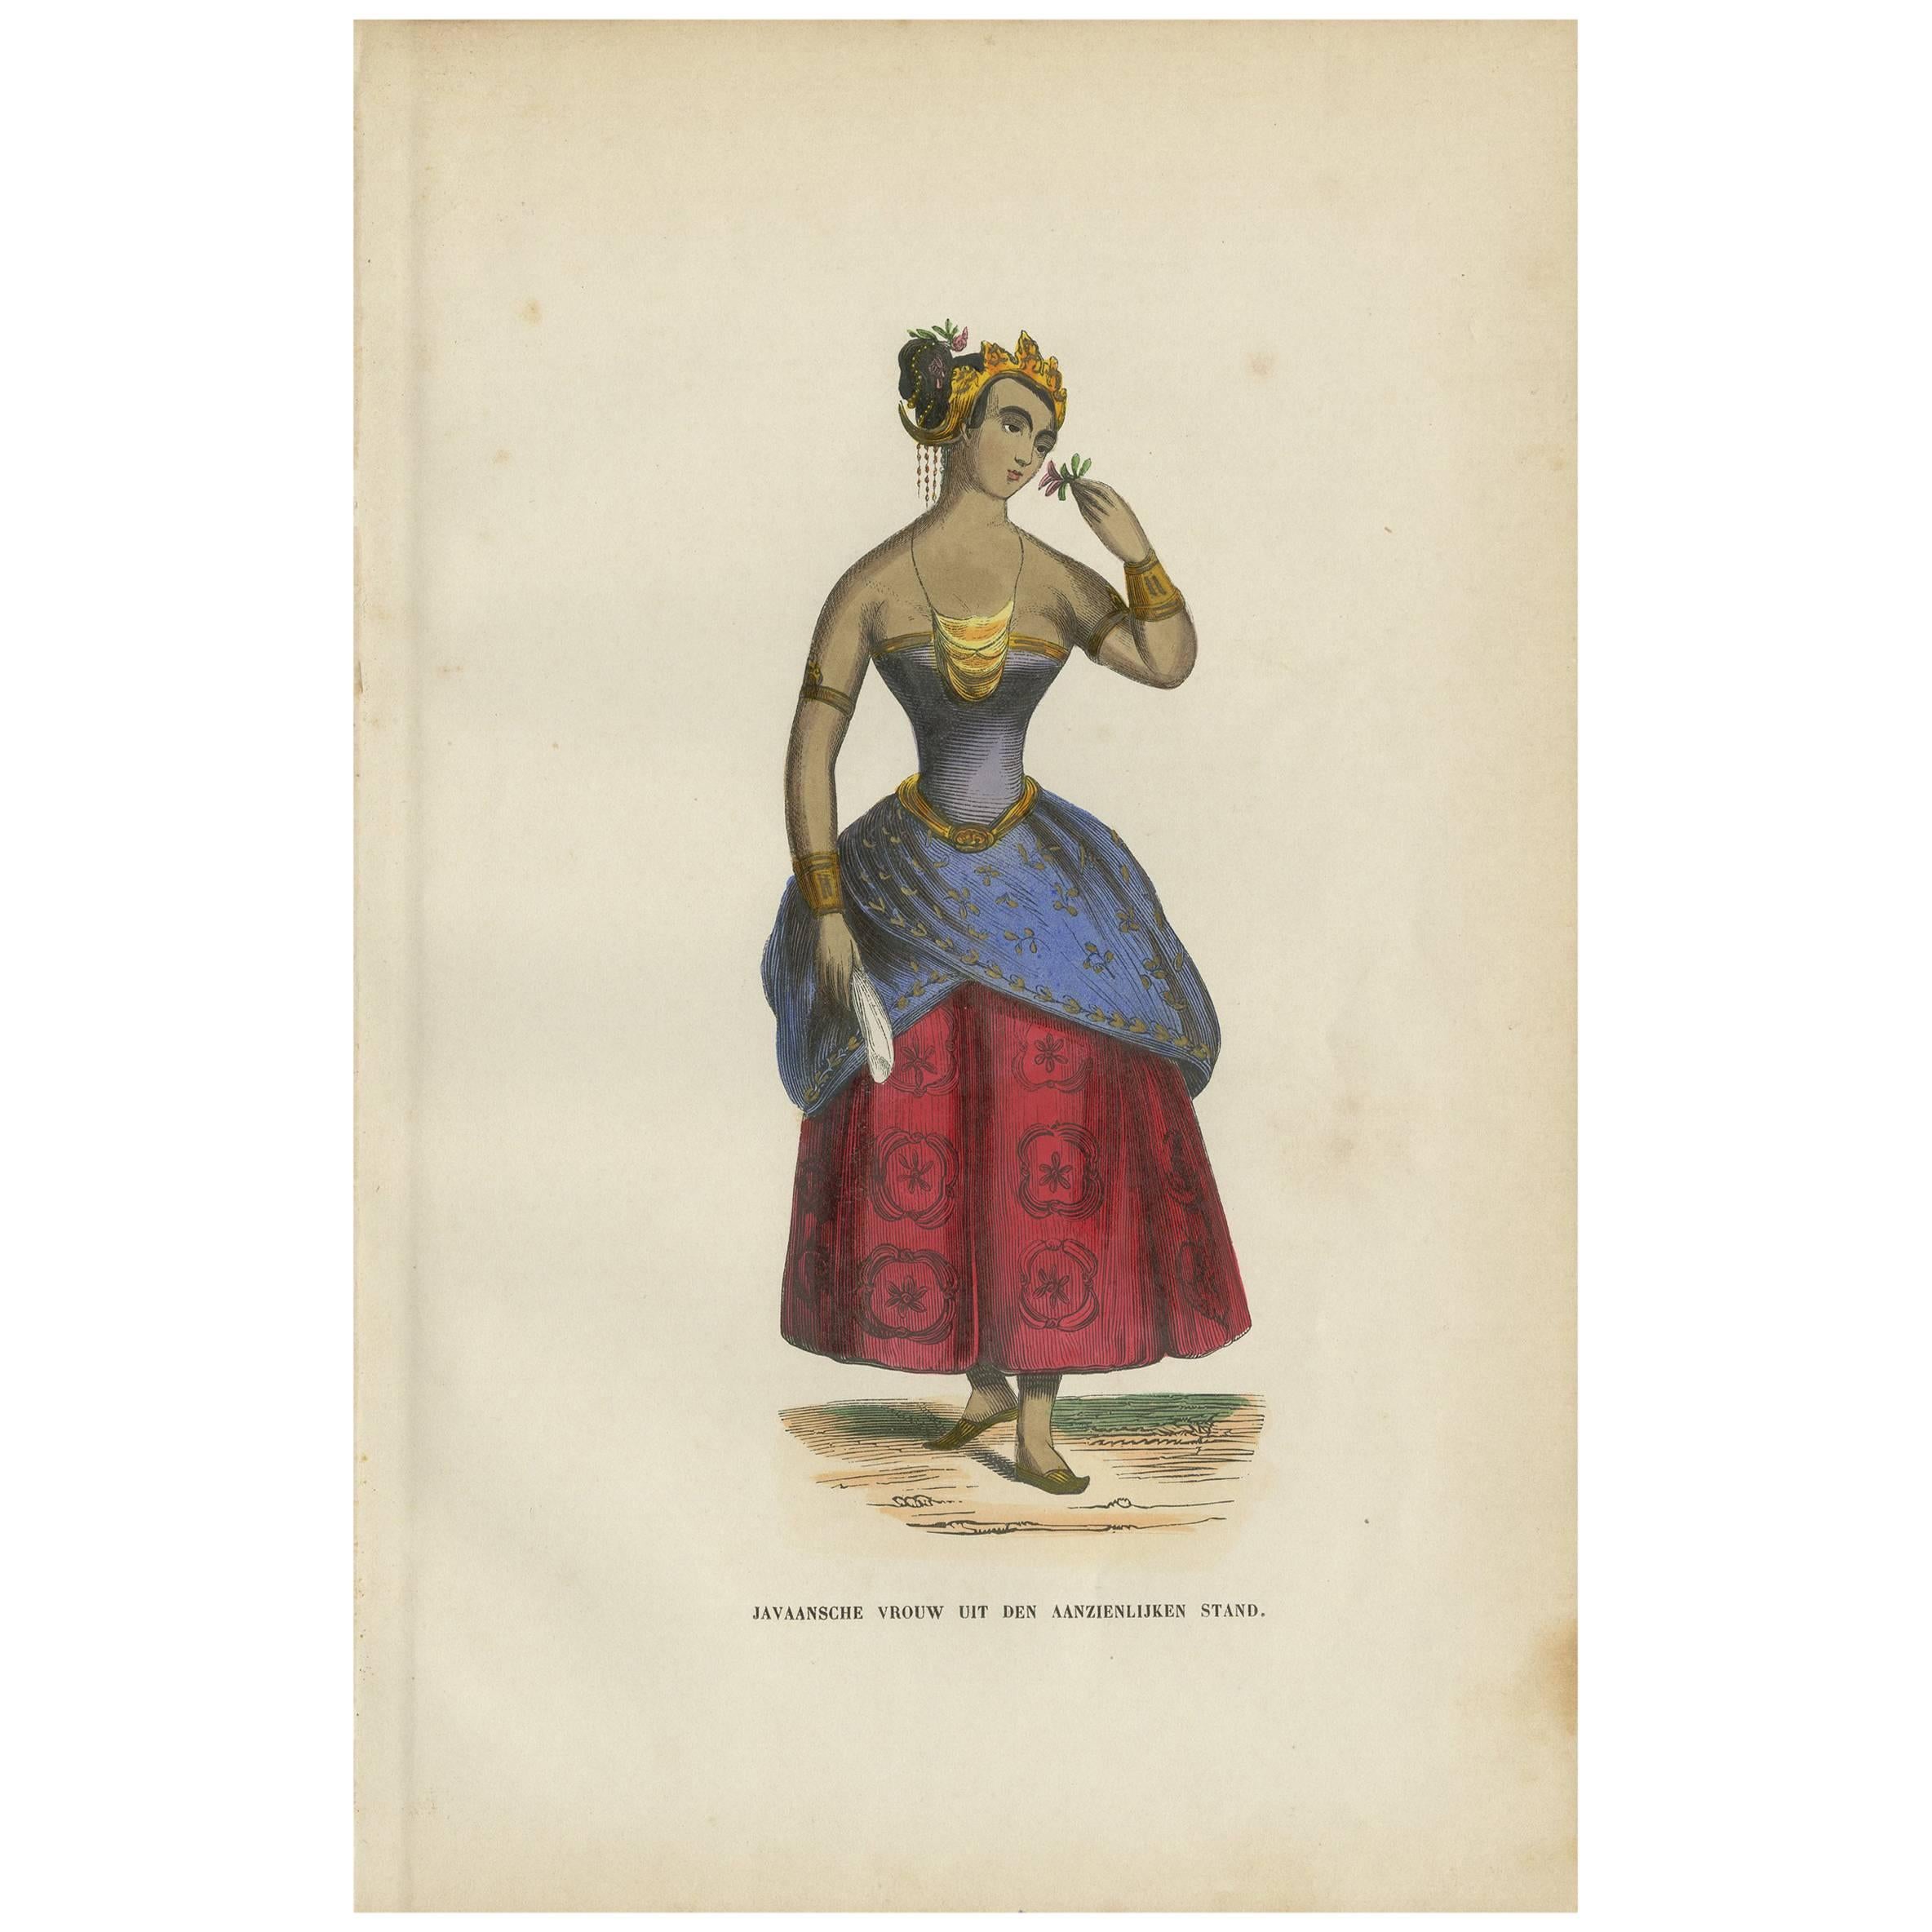 Antique Print of a Female Nobility of Java Indonesia by H. Berghaus, 1855